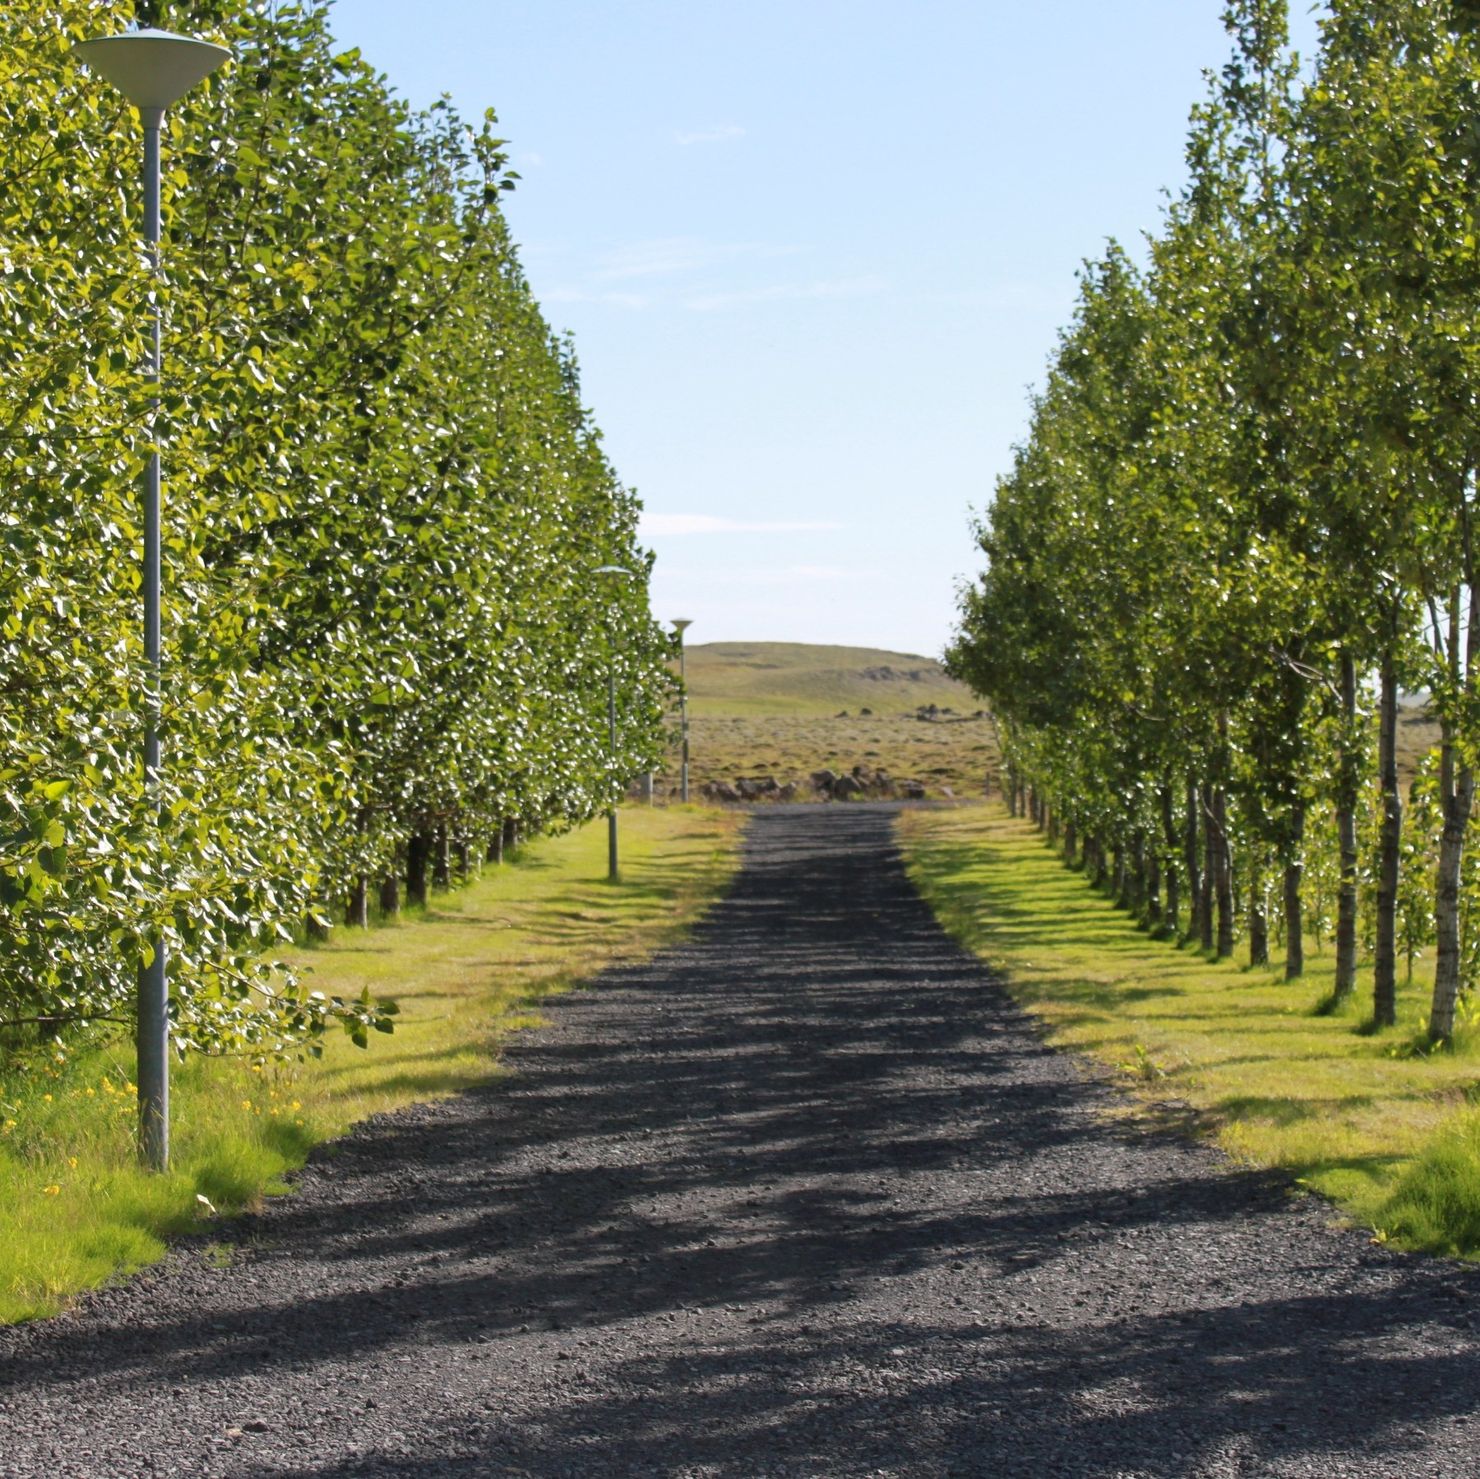 The access road to the holiday home leads through a grove